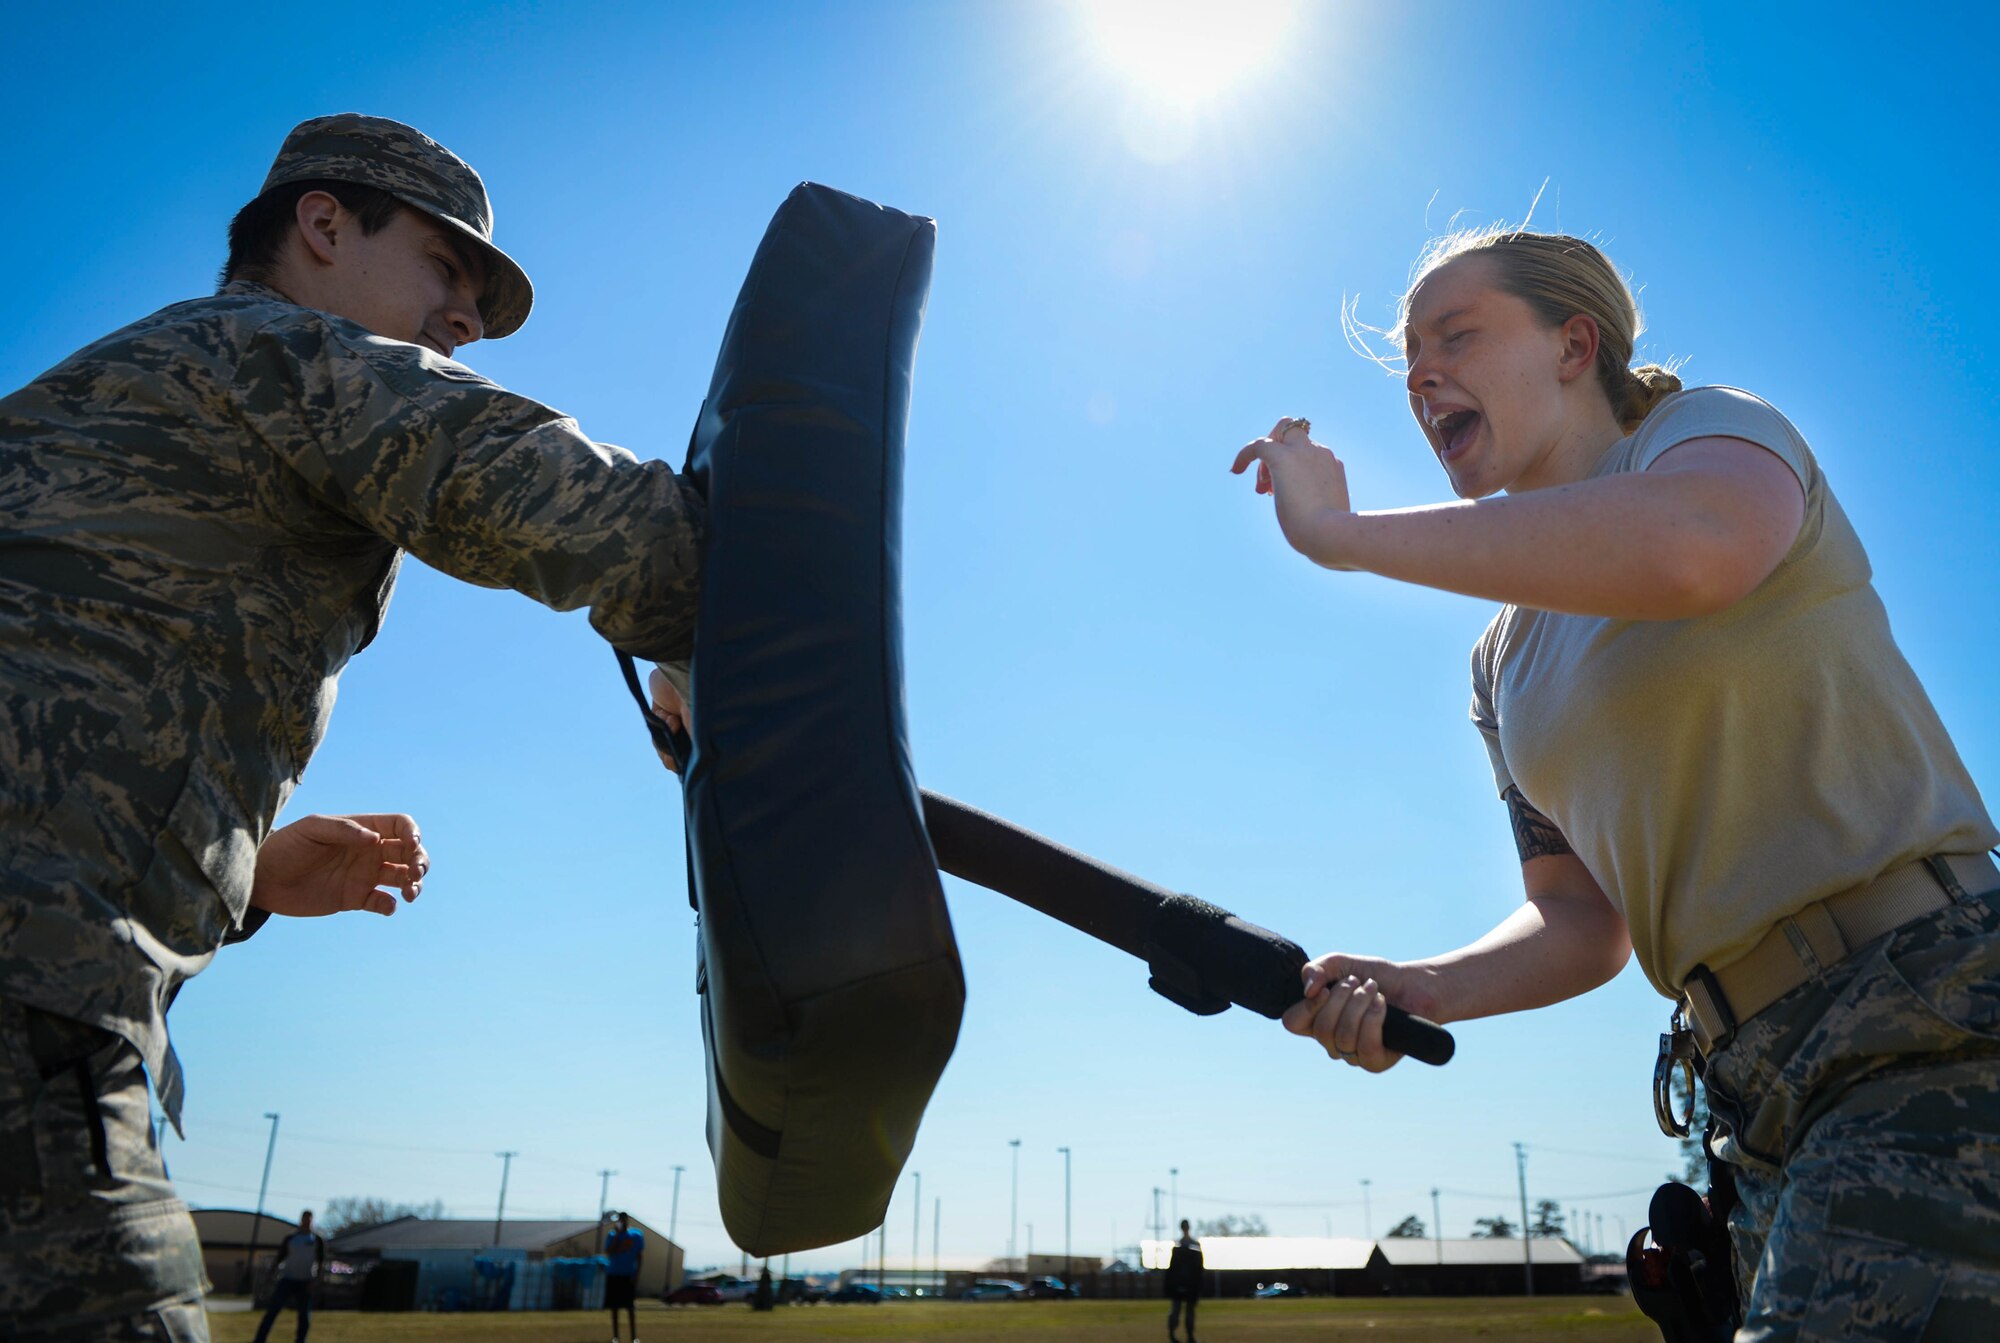 U.S. Air Force Airman 1st Class Hannah McCoy, 20th Security Forces Squadron journeyman (right), reacts to pepper spray while hitting a simulated perpetrator during training at Shaw Air Force Base, S.C., Feb. 29, 2016. McCoy, new to the 20th SFS, participated in the training to understand the effects of pepper spray. (U.S. Air Force photo by Senior Airman Jensen Stidham) 